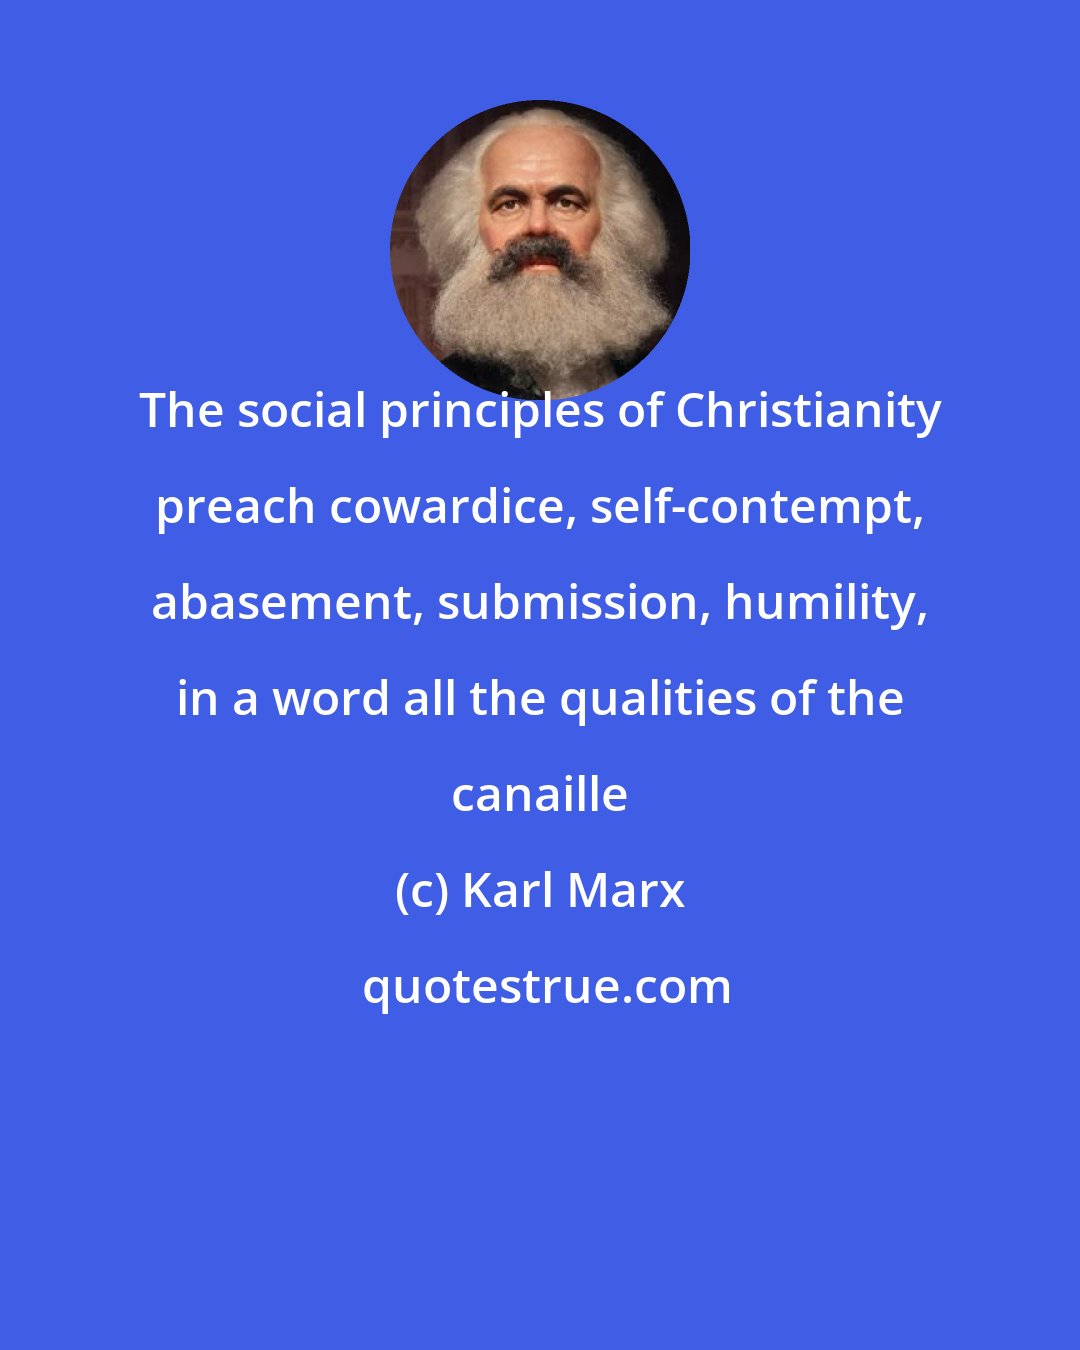 Karl Marx: The social principles of Christianity preach cowardice, self-contempt, abasement, submission, humility, in a word all the qualities of the canaille